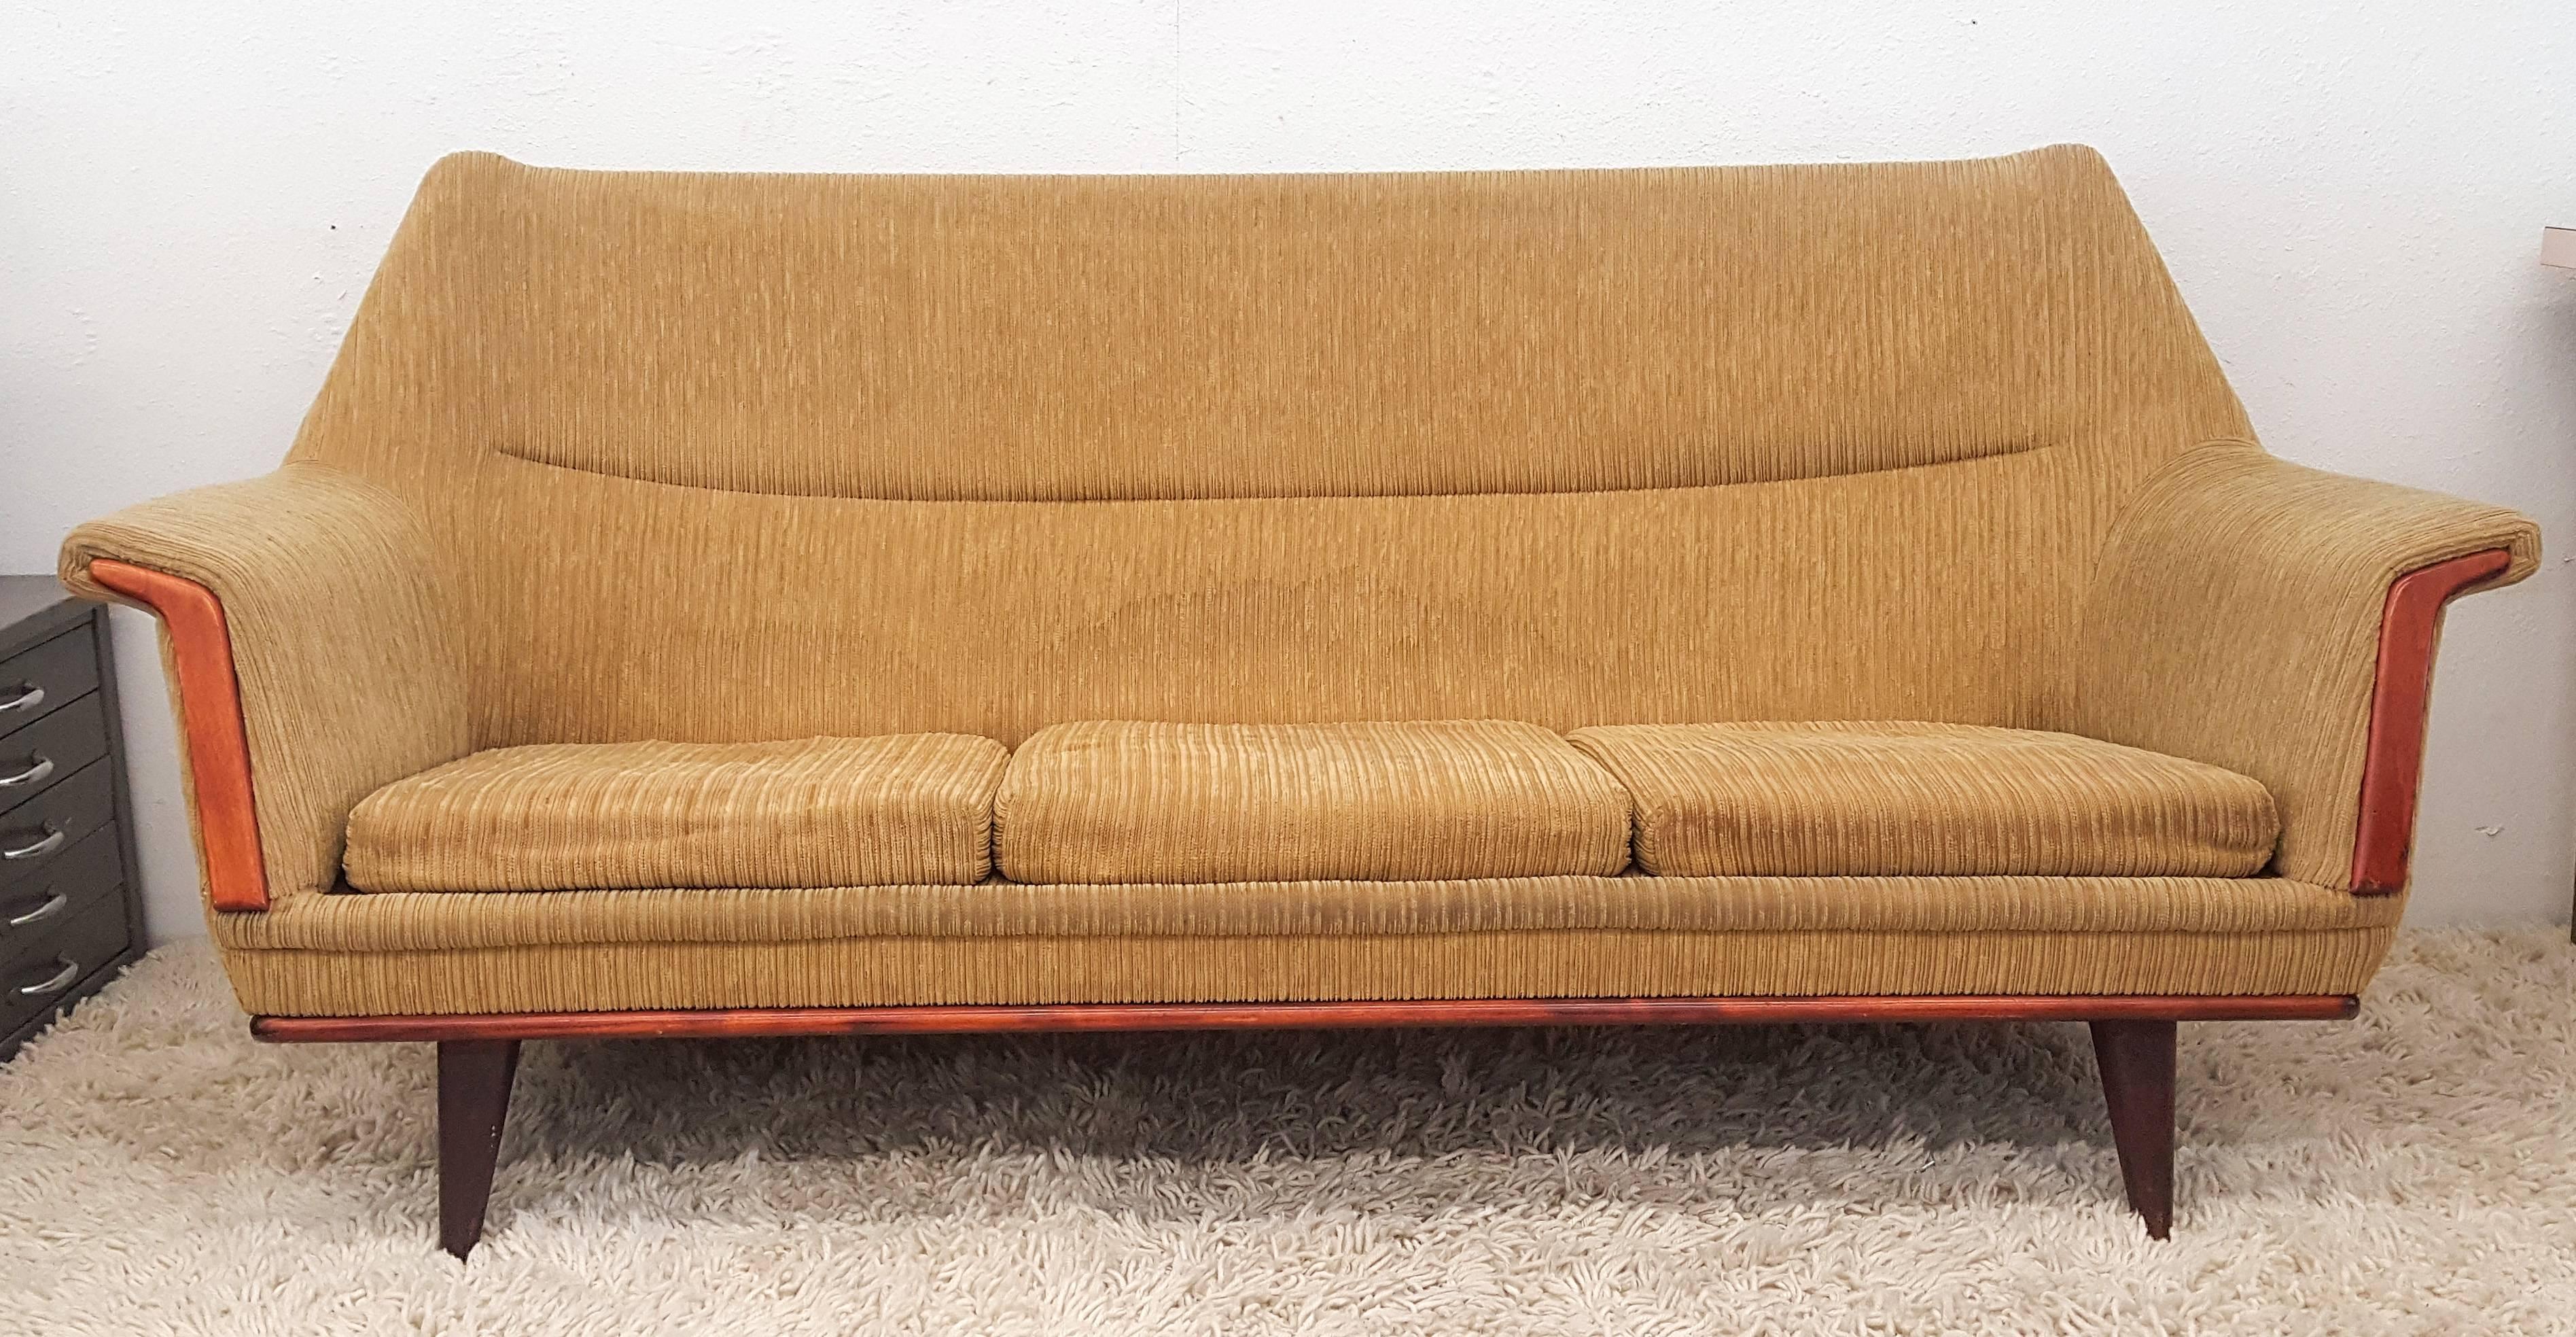 This sofa is absolutely gorgeous. With its clean lines and higher back, the form on this sofa is very reminiscent of Finn Juhl's Poet sofa. The sofa features a teak frame and teak trim and requires reupholstery.